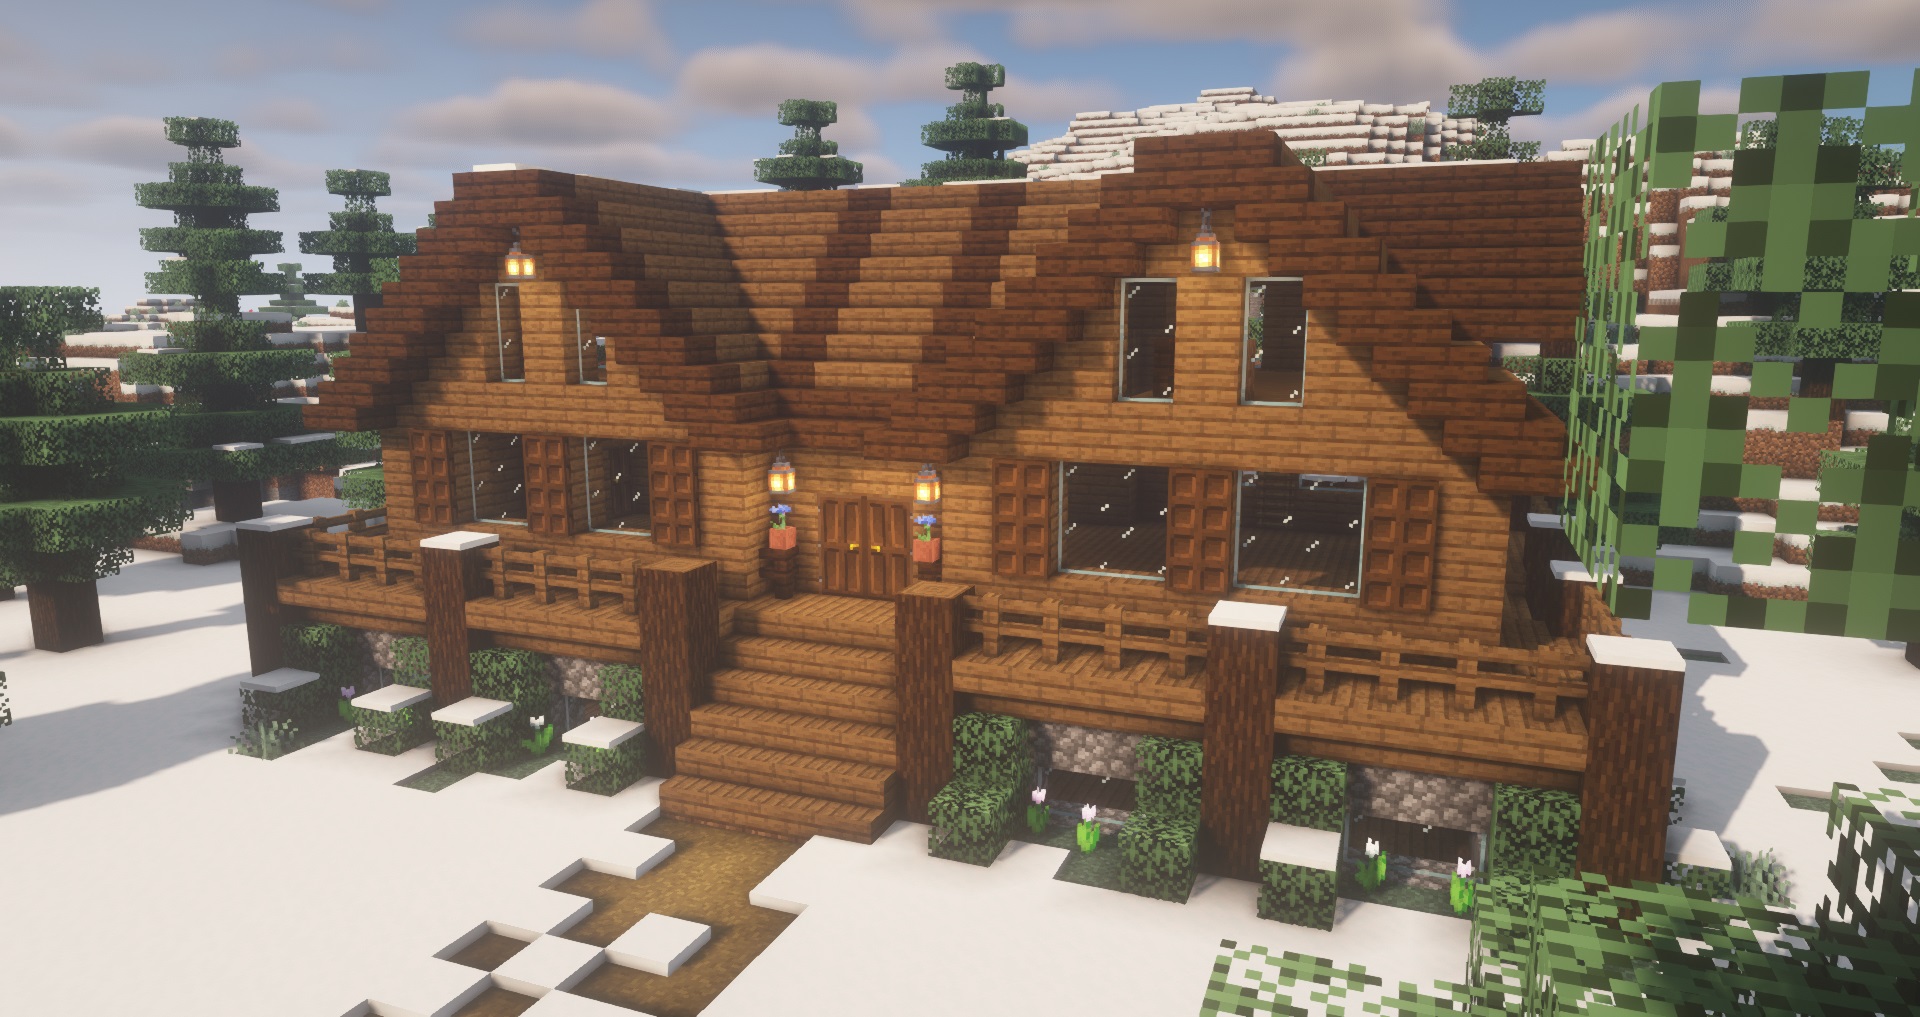 Minecraft - A large wood cabin with a raised deck and double hipped roof.